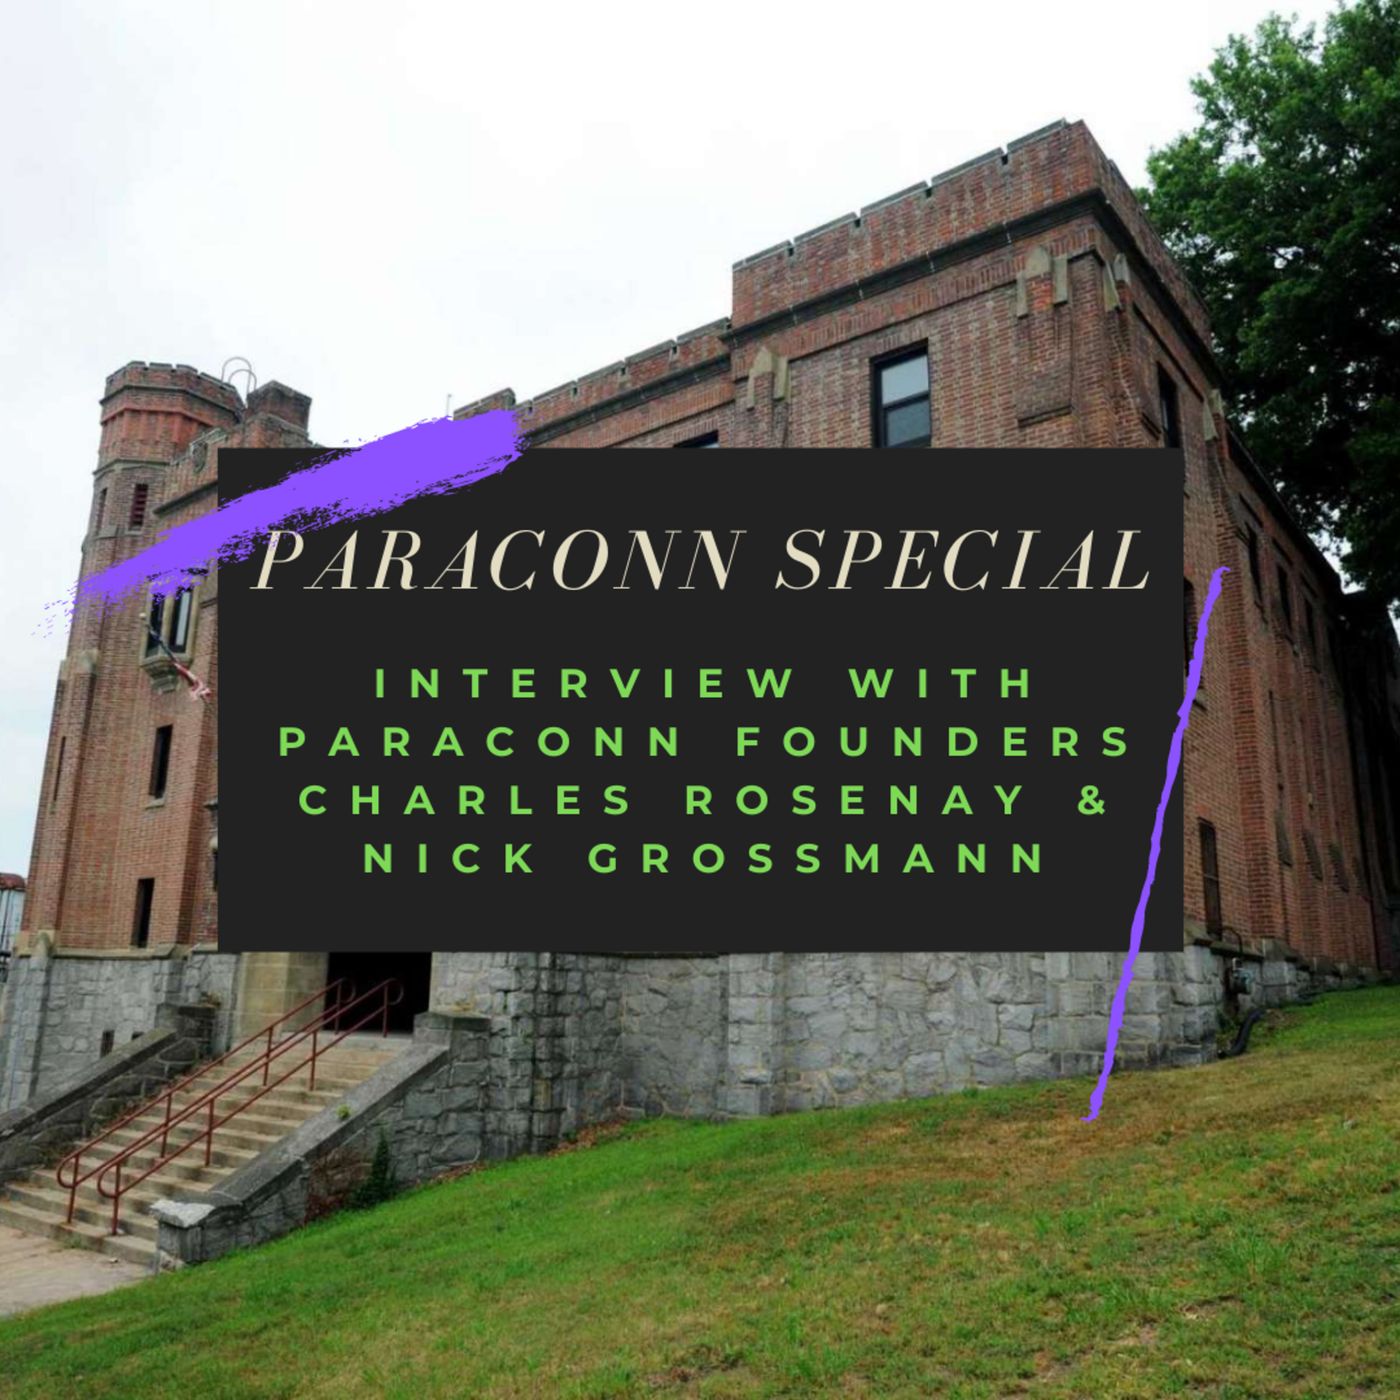 PARACONN SPECIAL: Interview with ParaConn Founders Charles Rosenay & Nick Grossmann Image